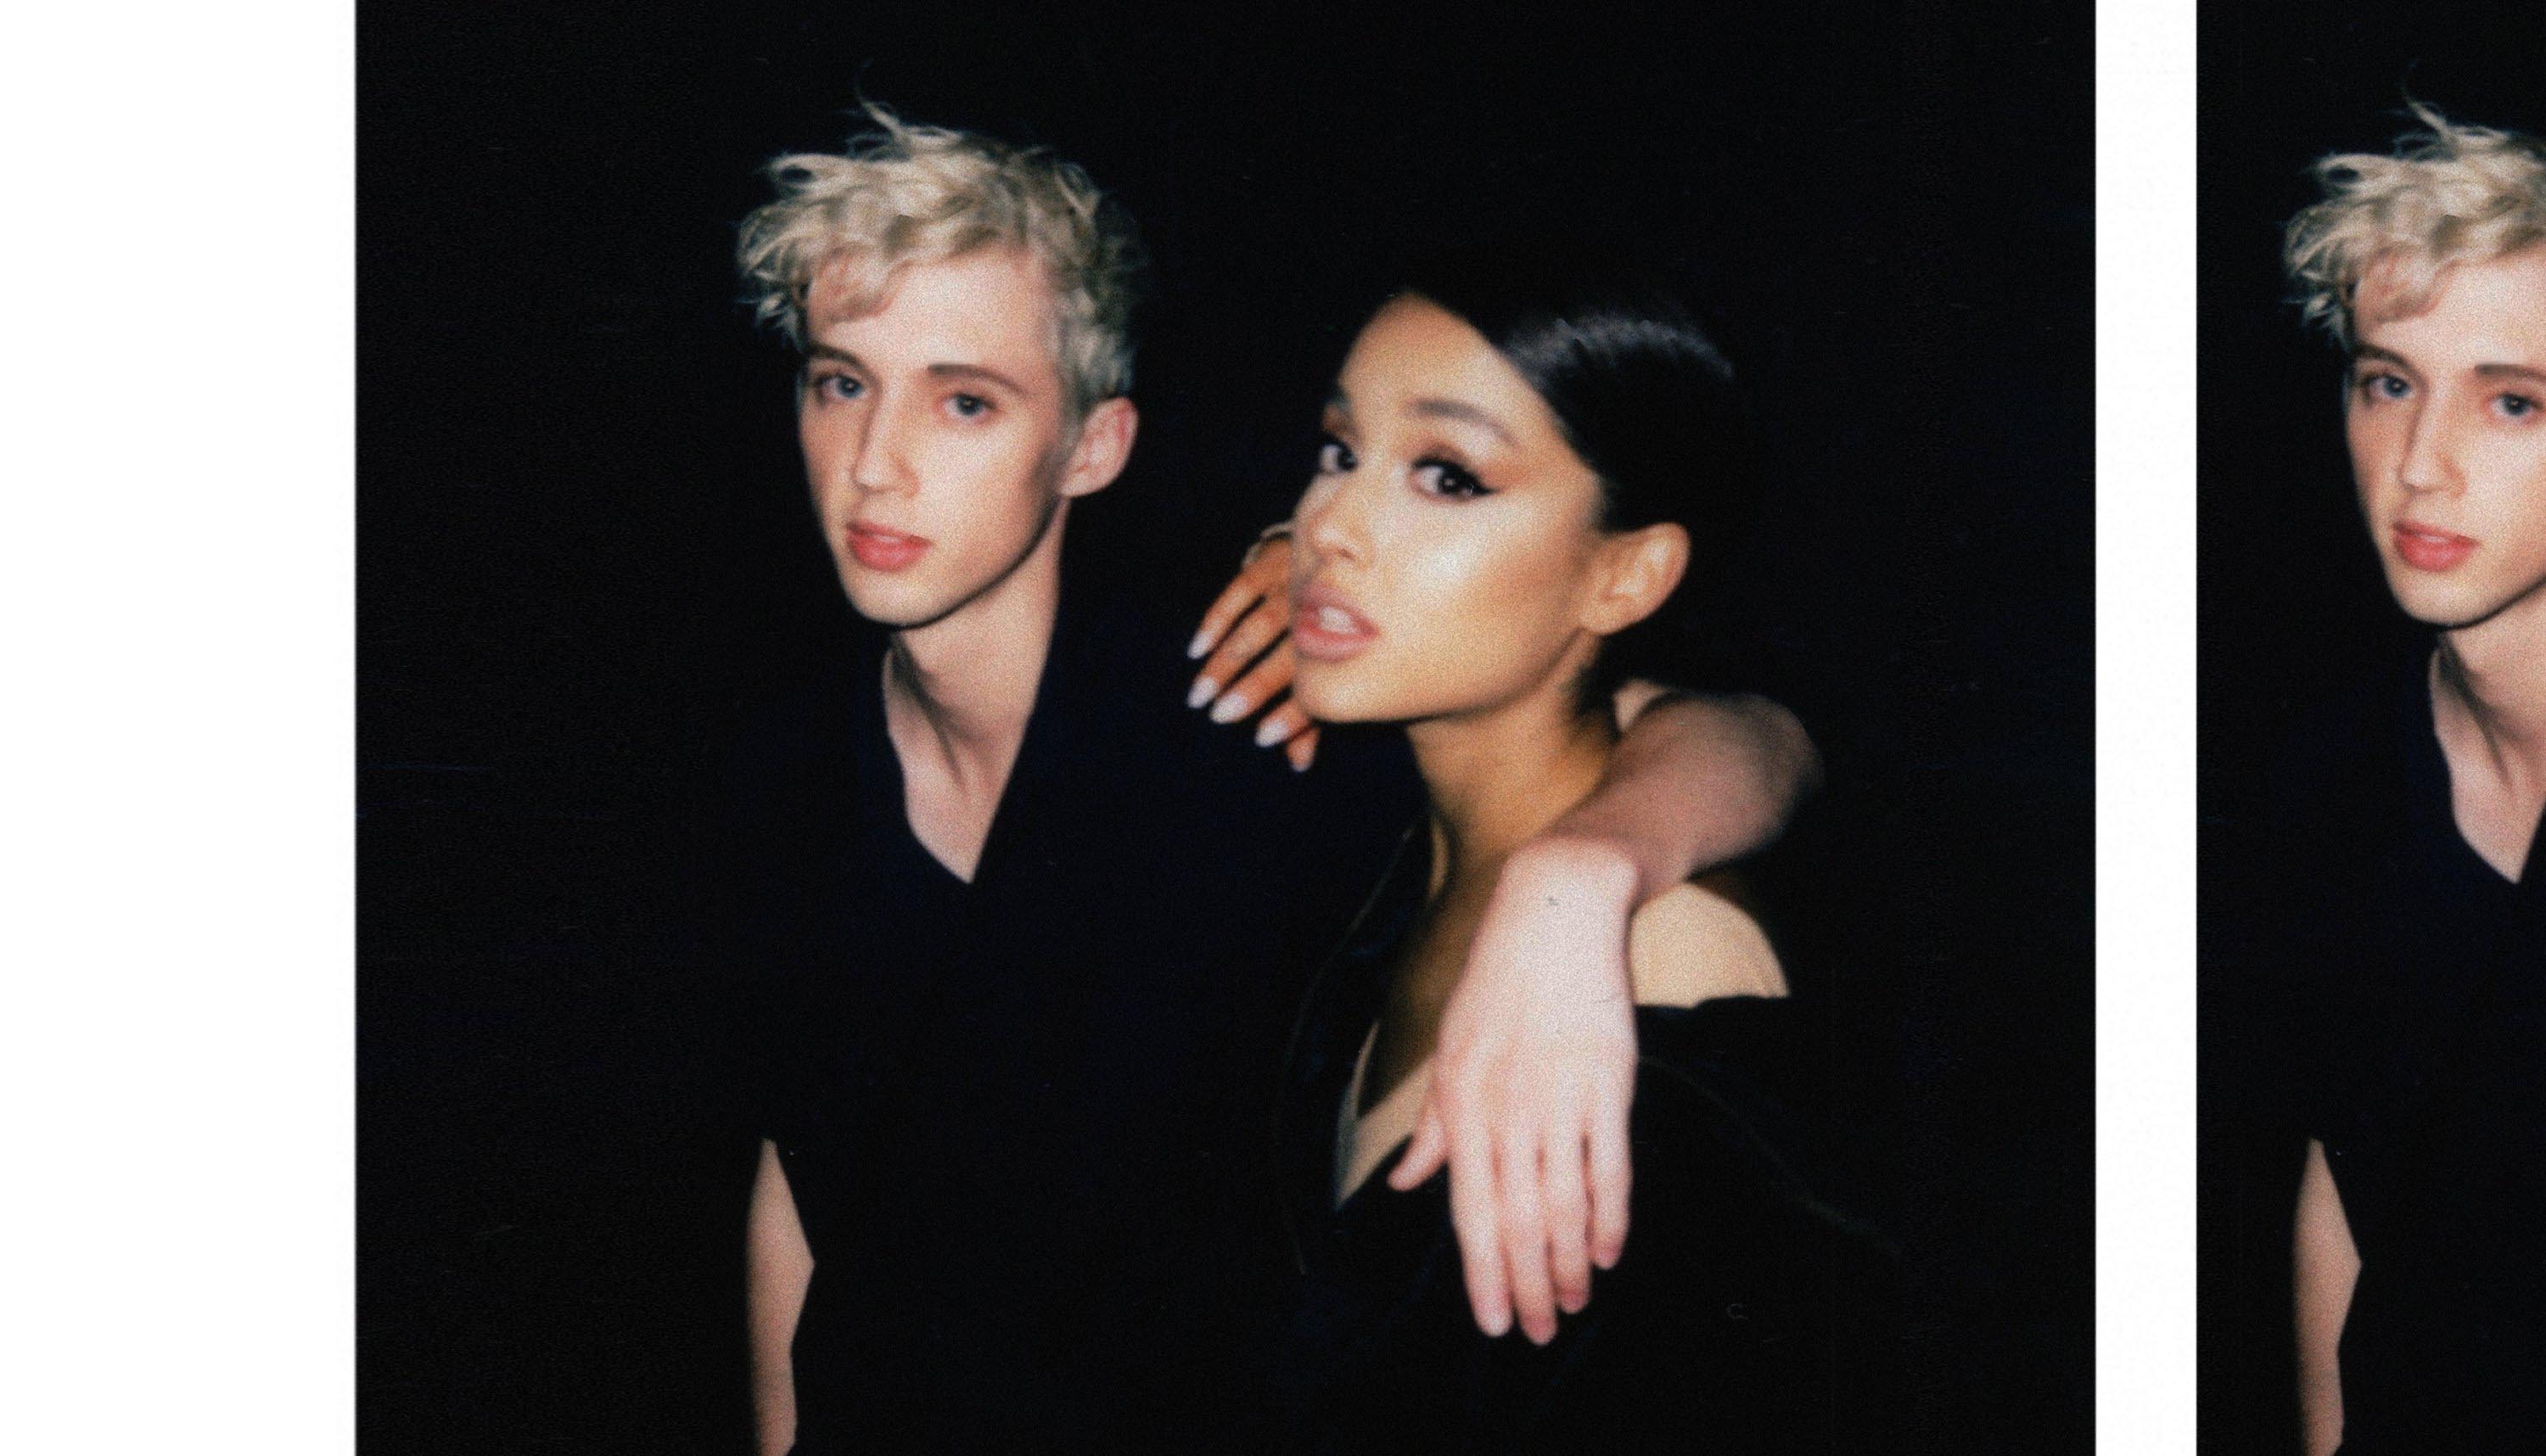 Troye Sivan Dance To This feat. Ariana Grande